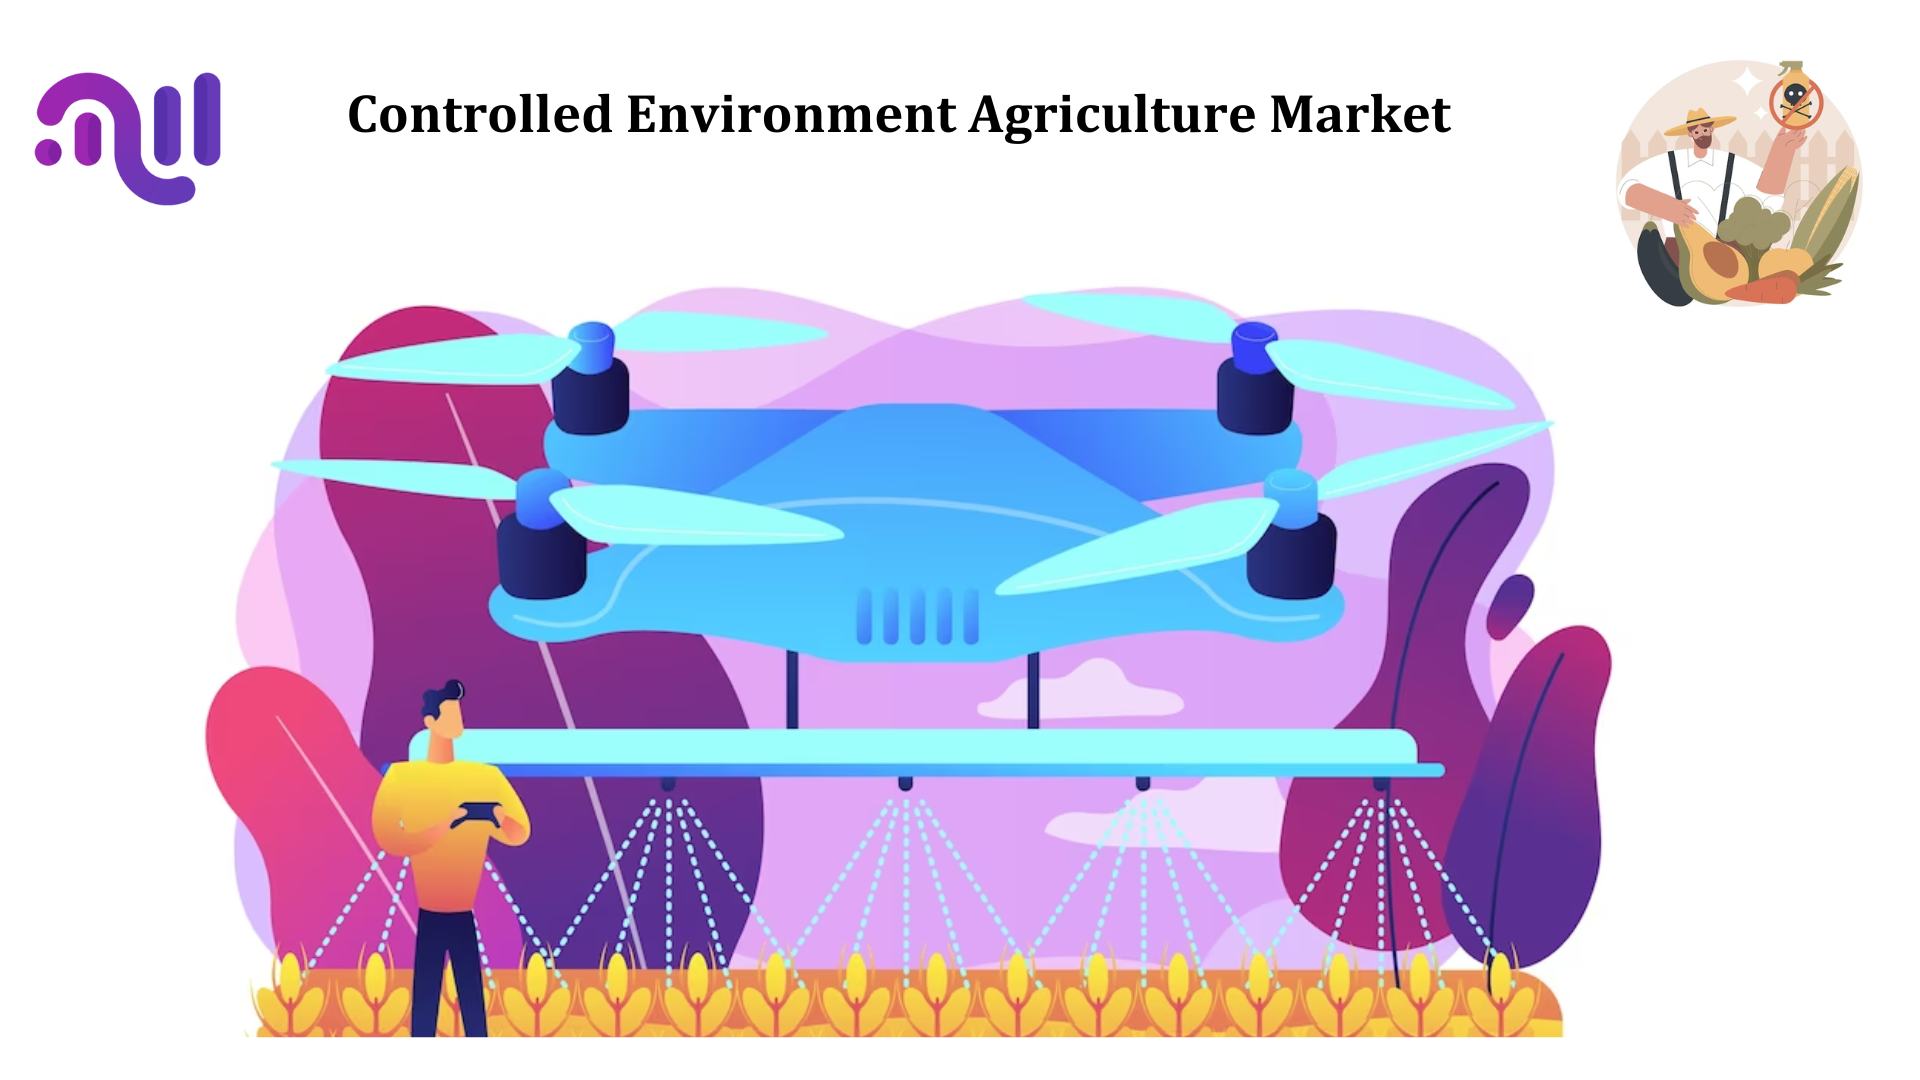 Controlled Environment Agriculture Market Revenues Projected To Reach USD 377.6 Bn By 2032 With A 18.13% CAGR